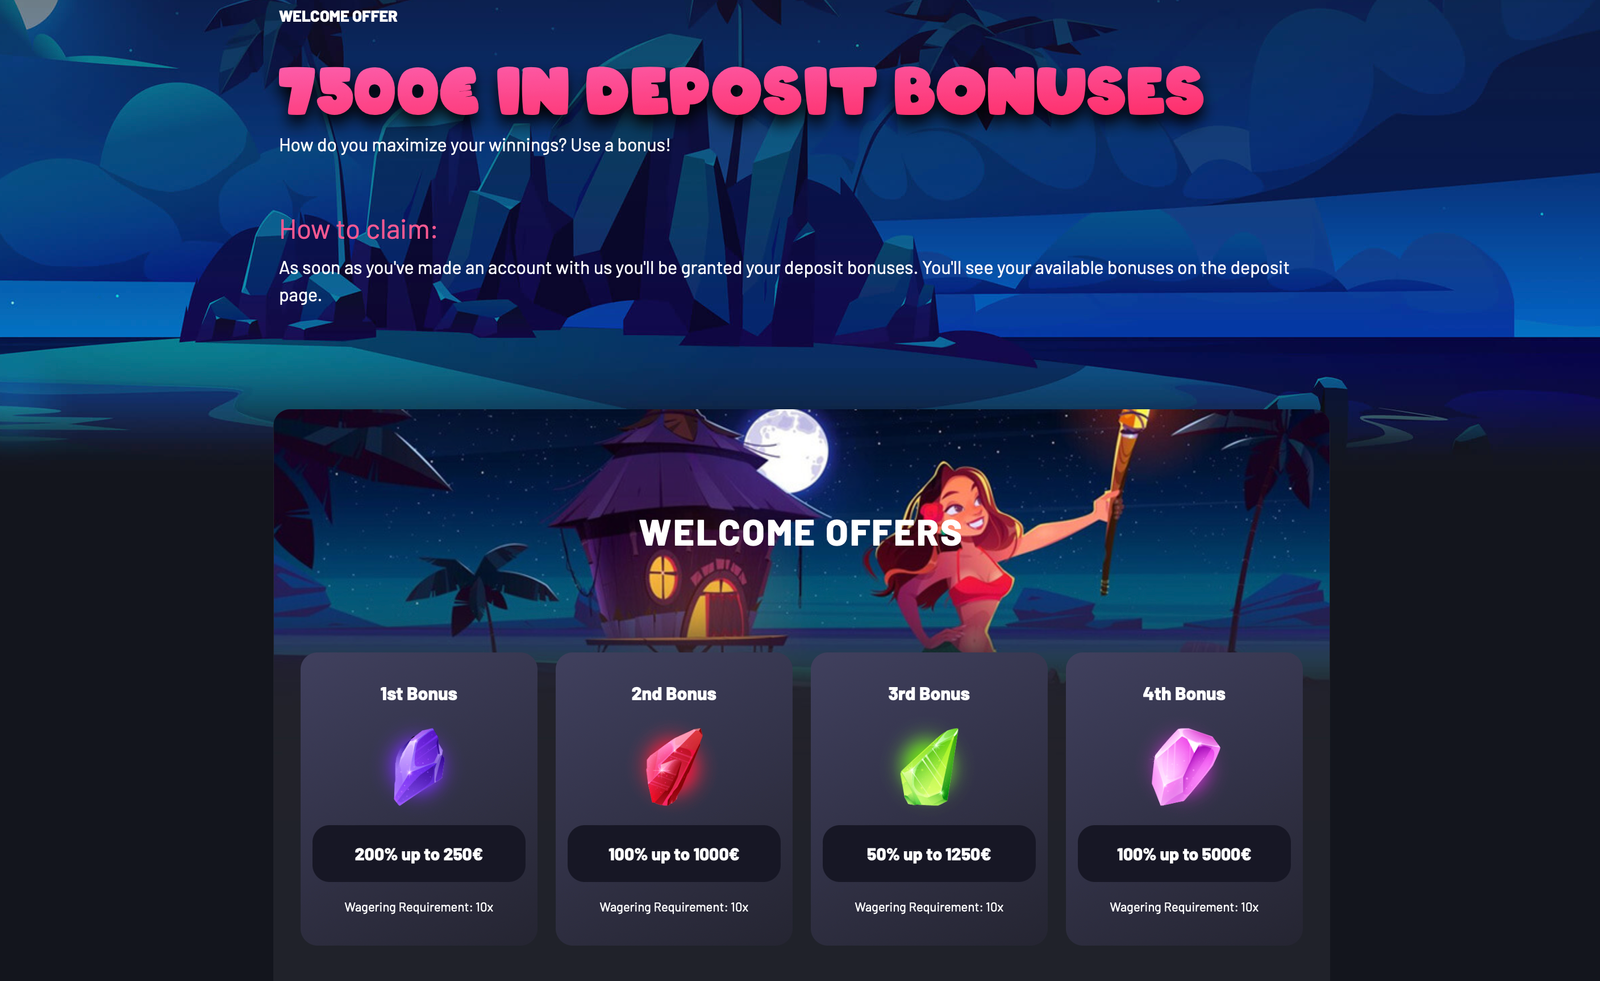 this is an image showcasing bonuses of a non - gamstop casino called seven casino